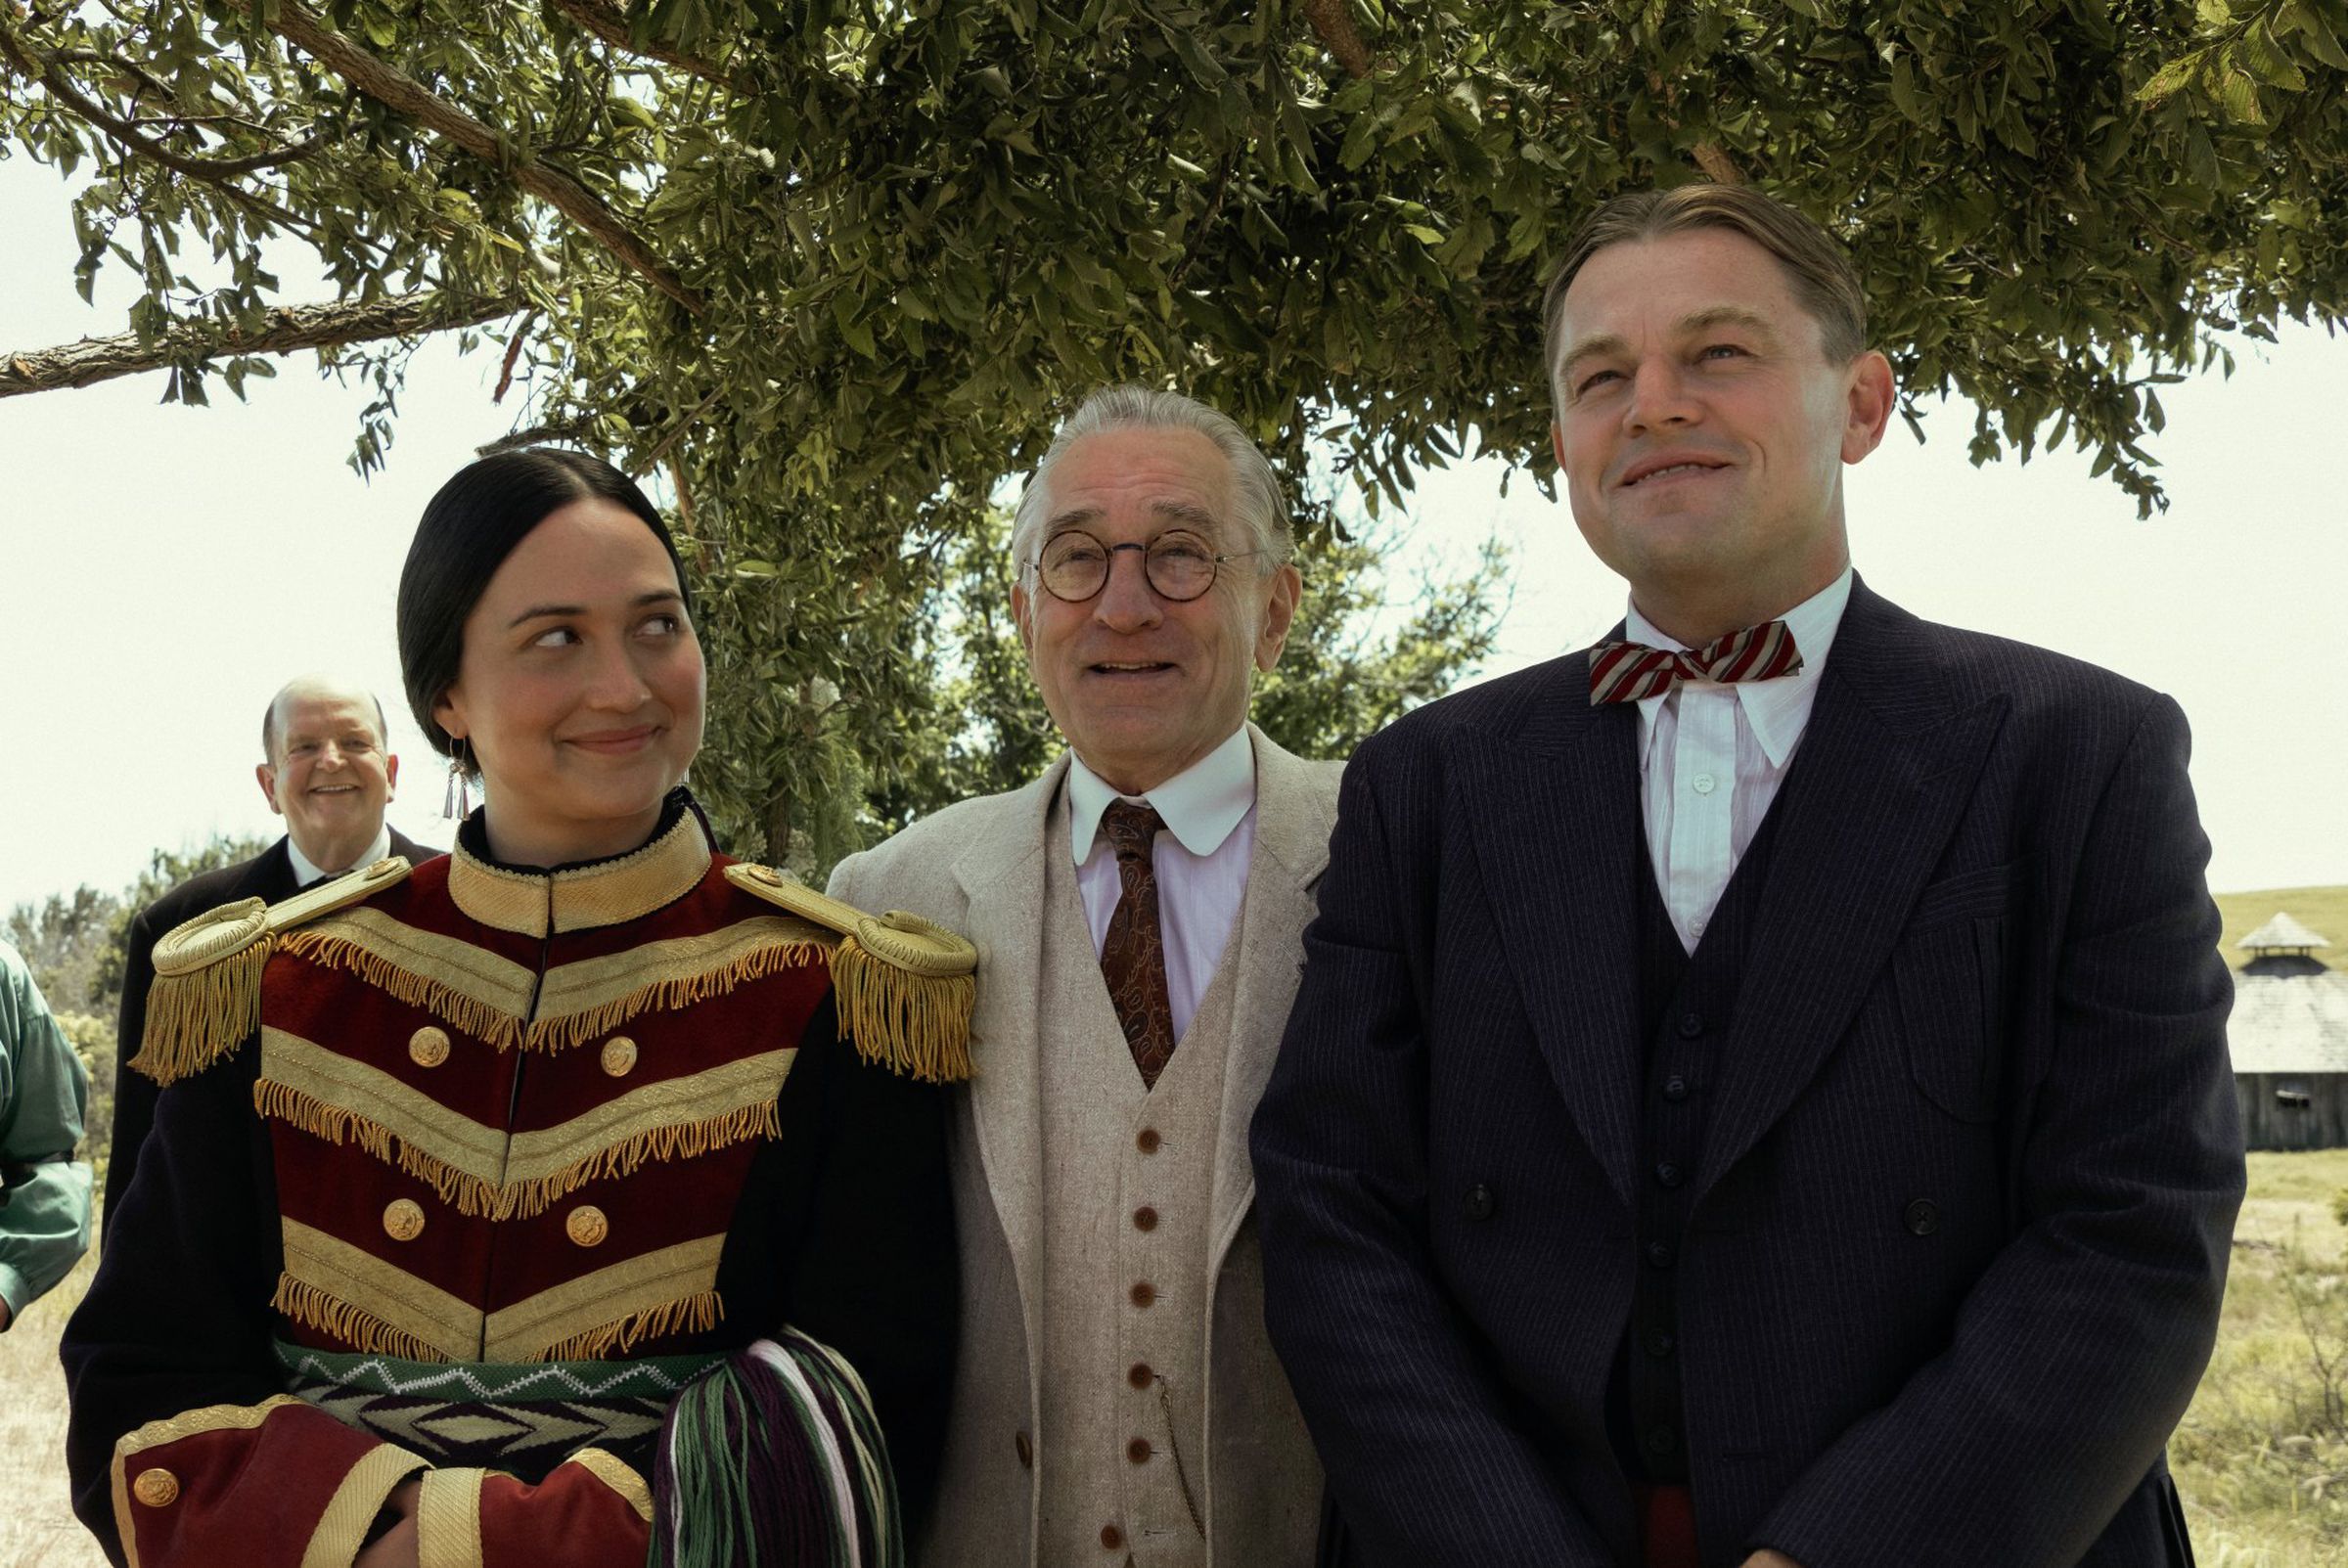 A still image from the movie showing stars Lily Gladstone, Robert De Niro and Leonardo DiCaprio standing next to each other.